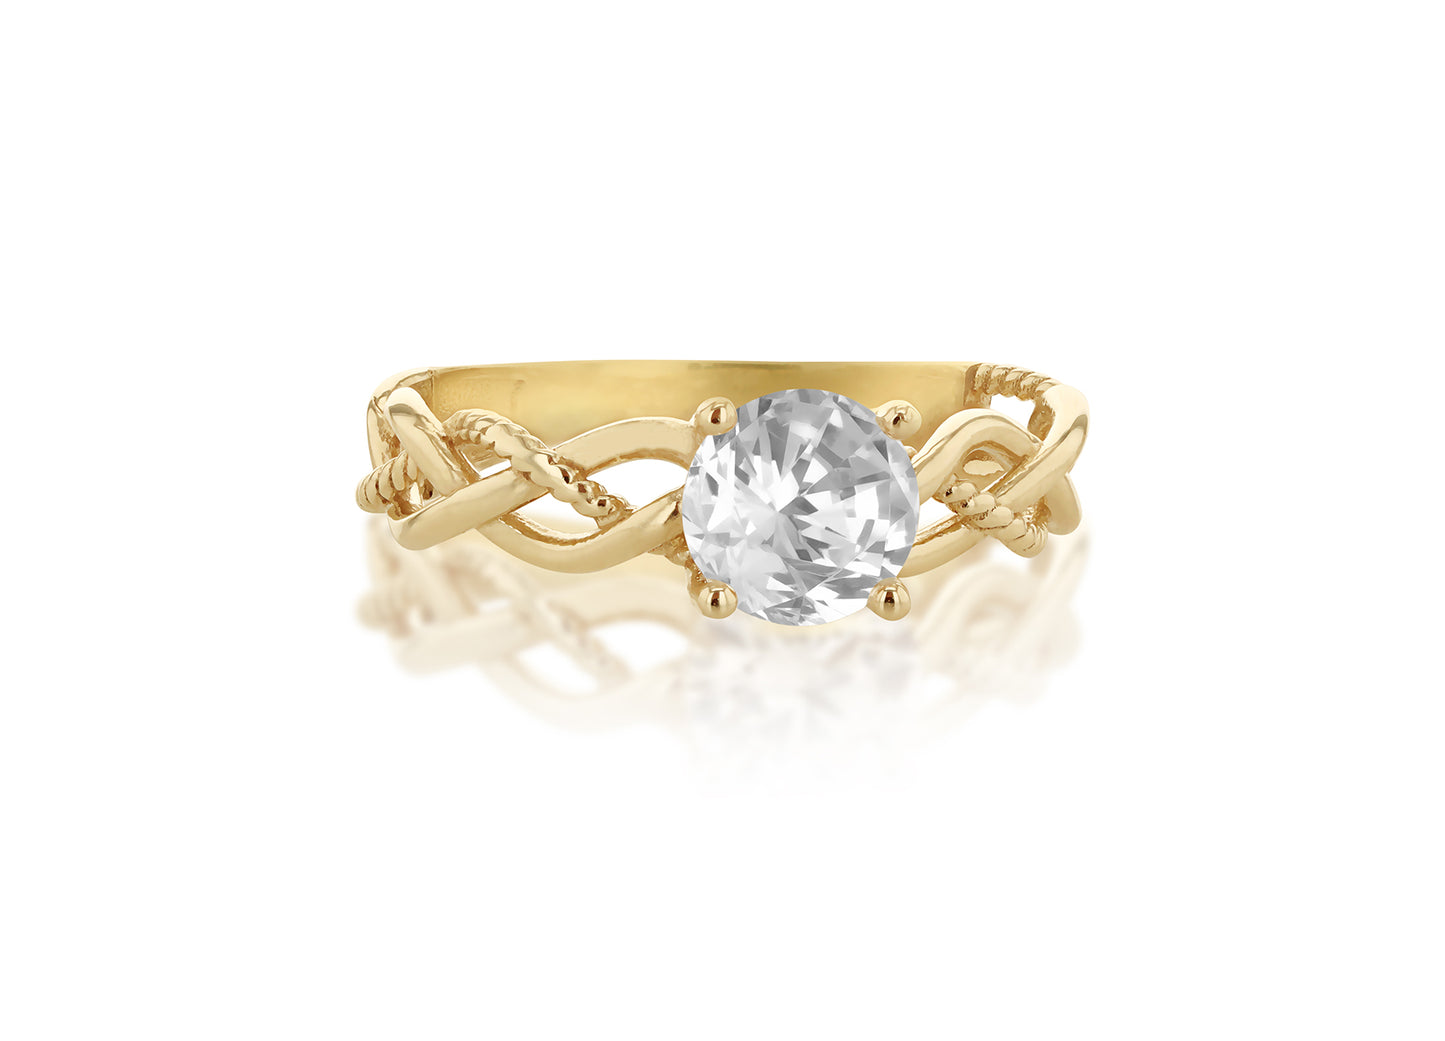 9ct Yellow Gold DC Plaited Band CZ Ring